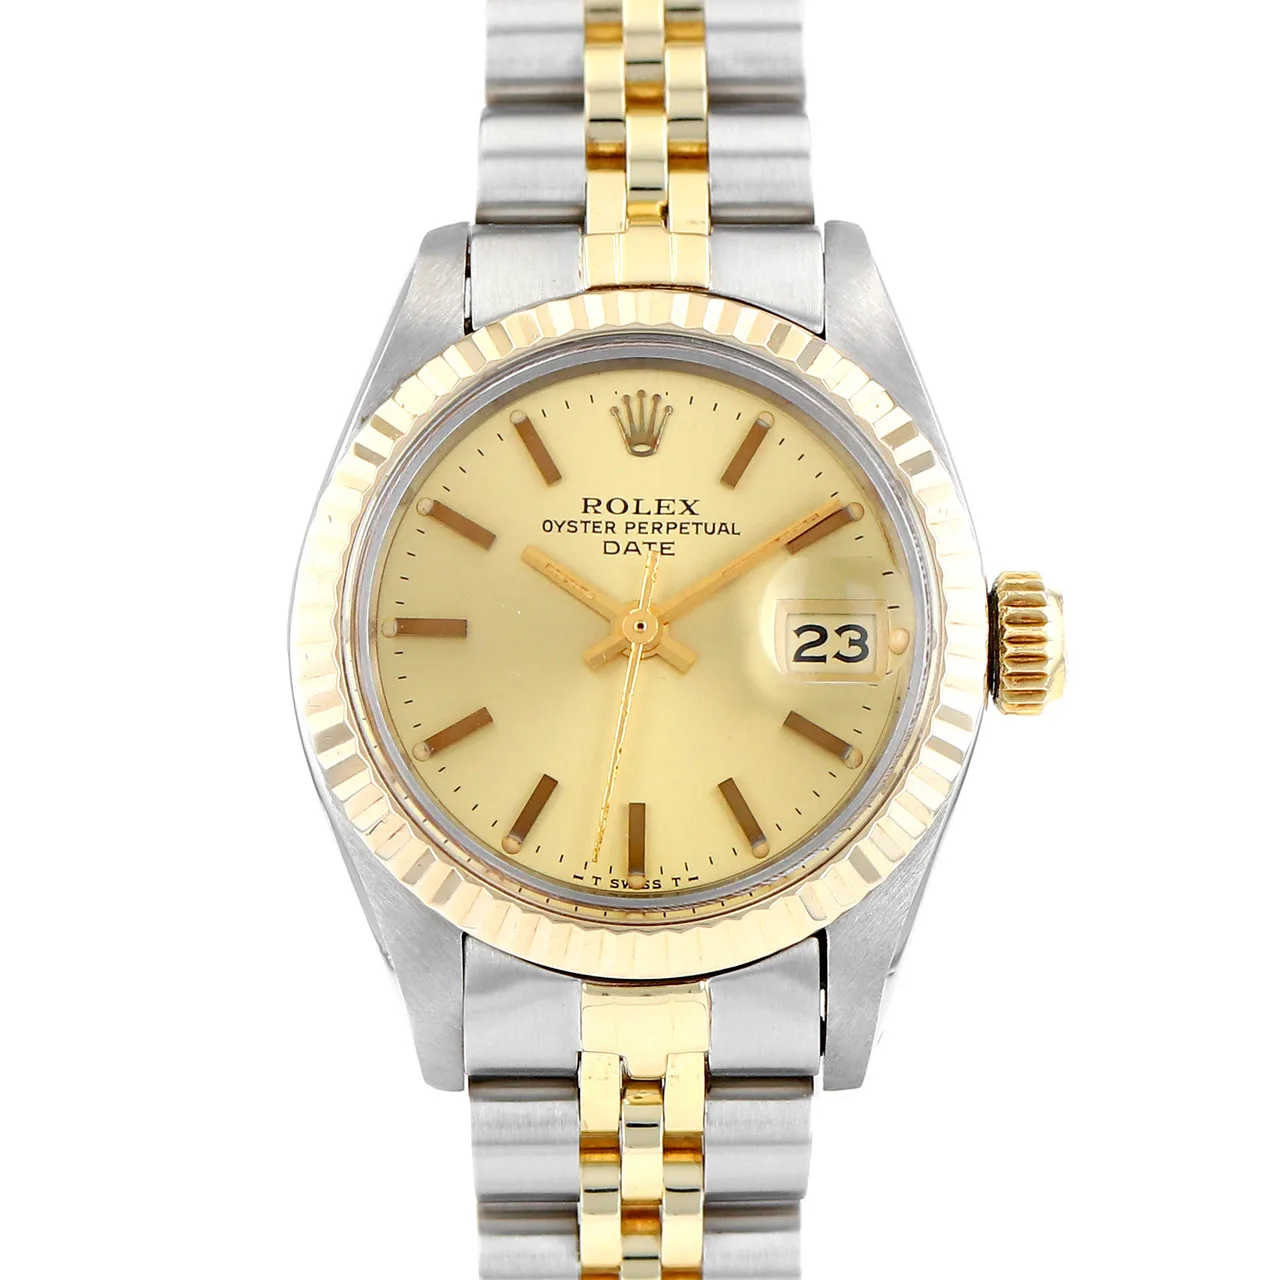 Rolex Datejust 26 Two-Tone / Fluted / Champagne / Jubilee  69173 Listing Image 1